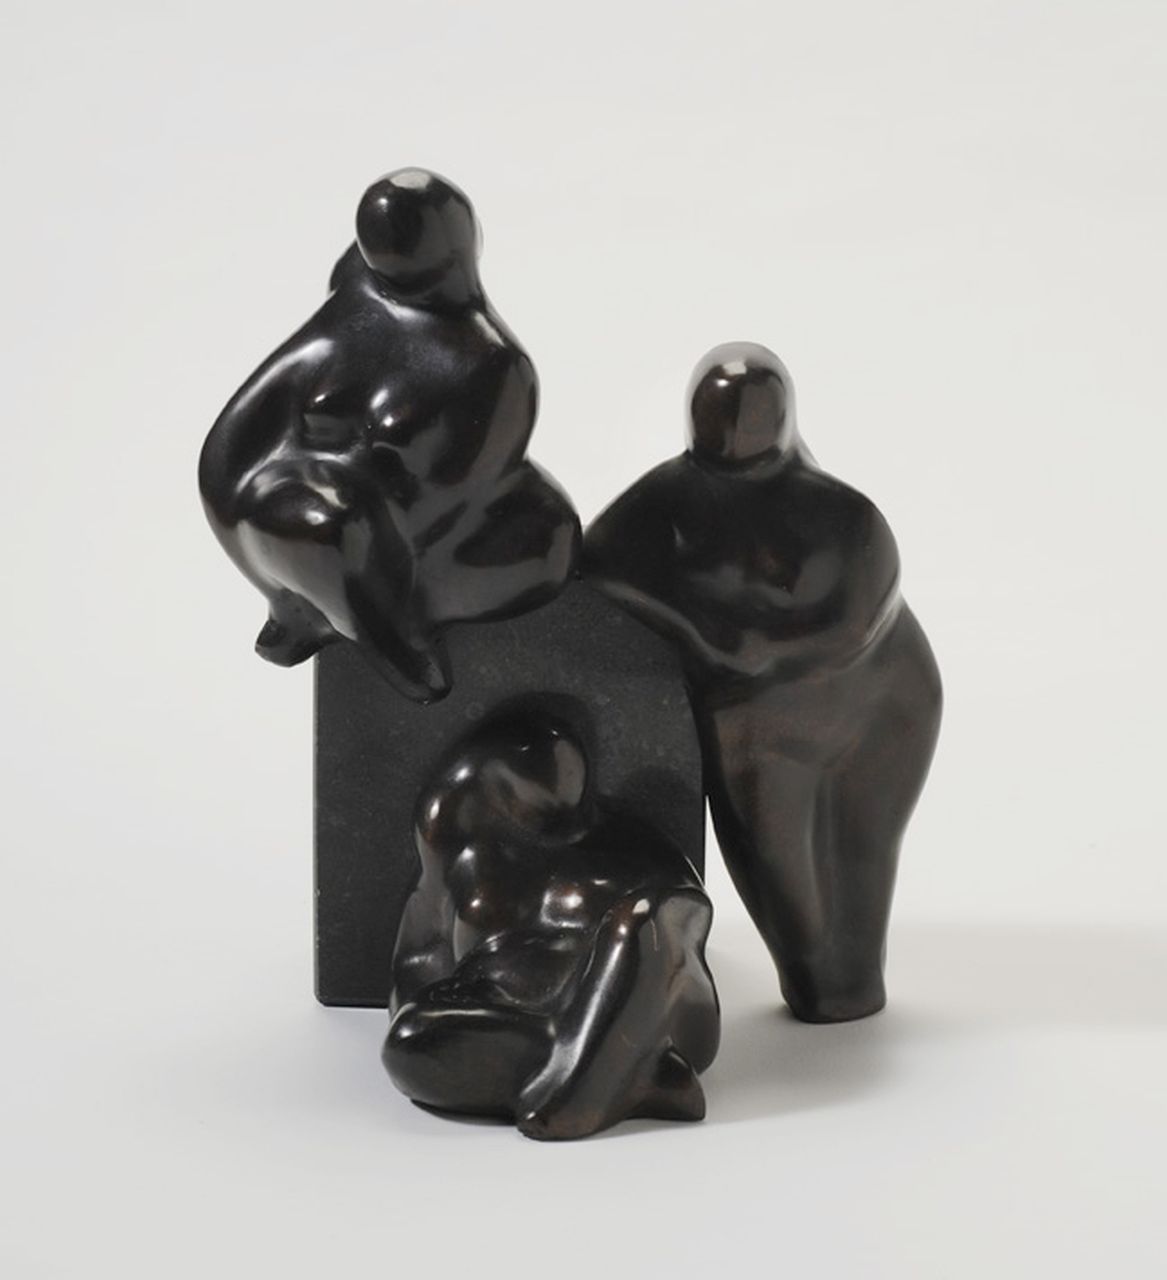 Theo Germann | Three women, bronze, 21.7 x 18.8 cm, signed at the back of the standing figure and dated '87 on the reverse